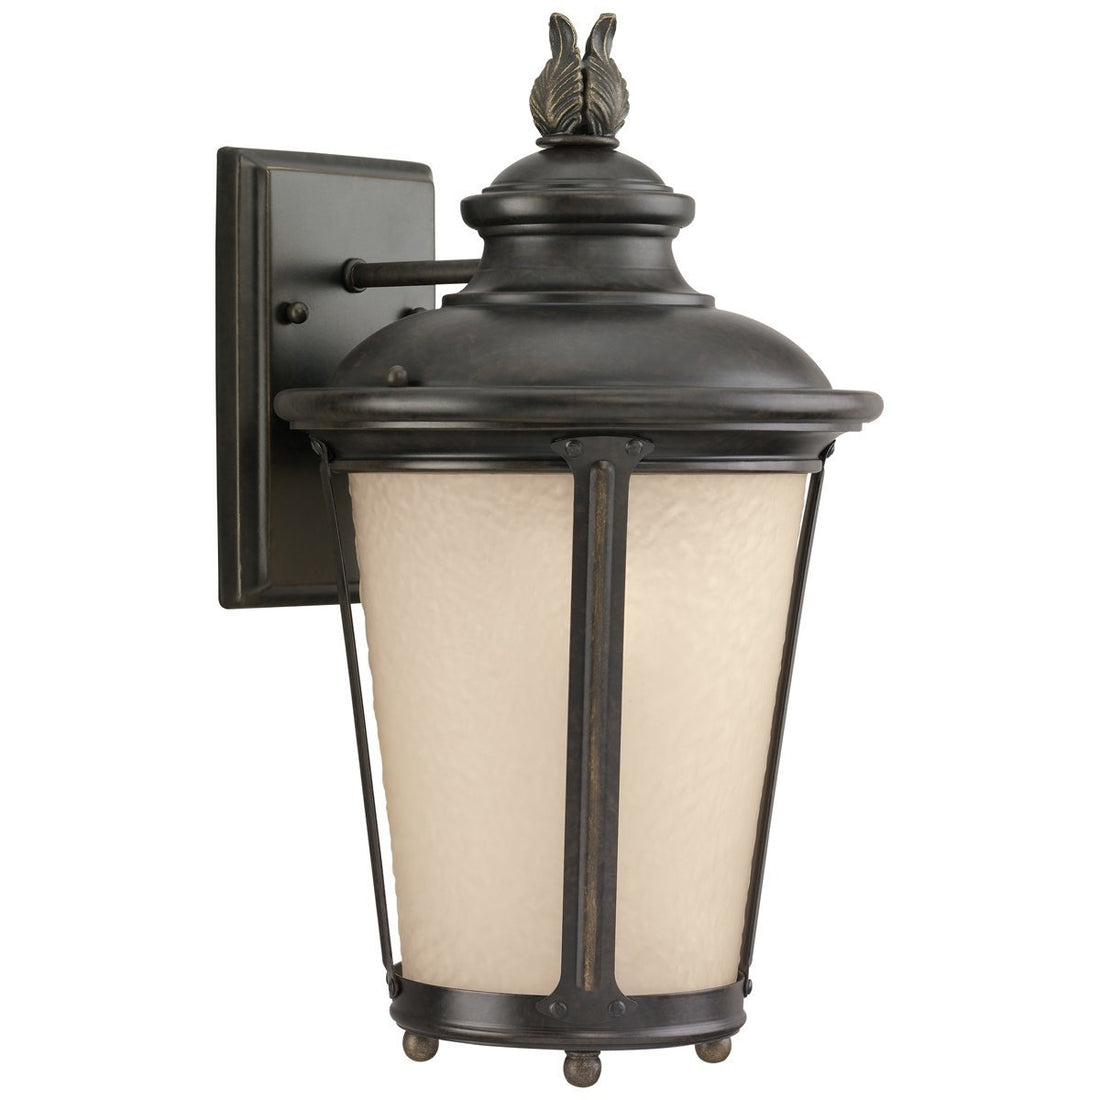 Sea Gull Lighting Cape May Traditional One Light Outdoor Wall Lantern